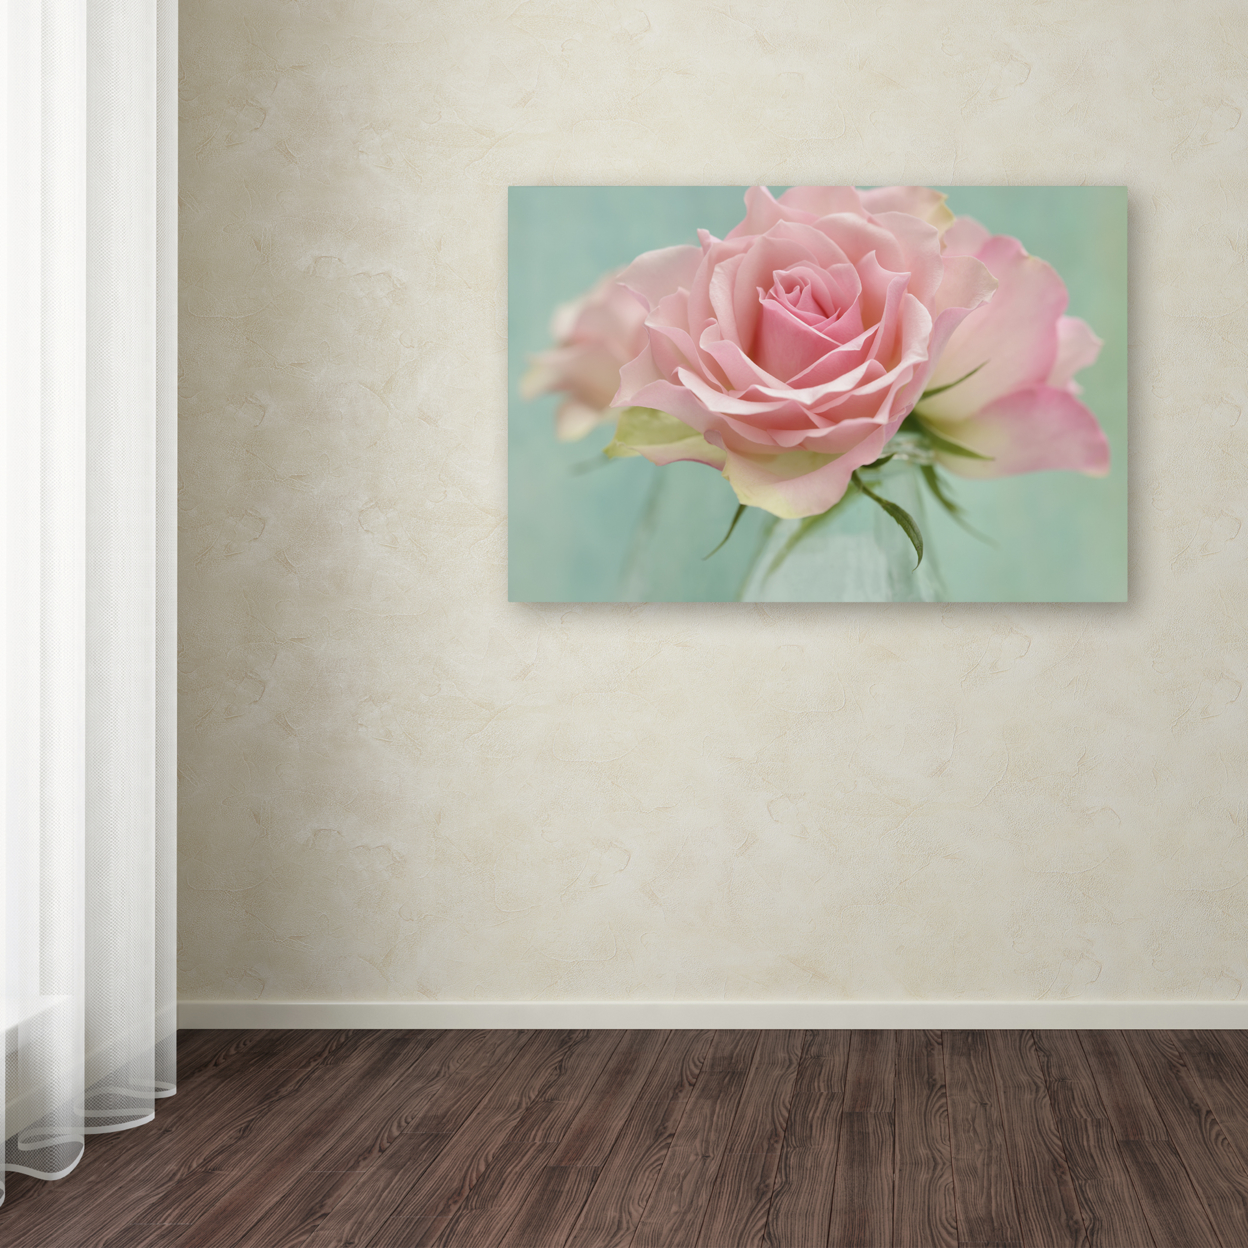 Cora Niele 'Pink Roses' Canvas Art 16 X 24